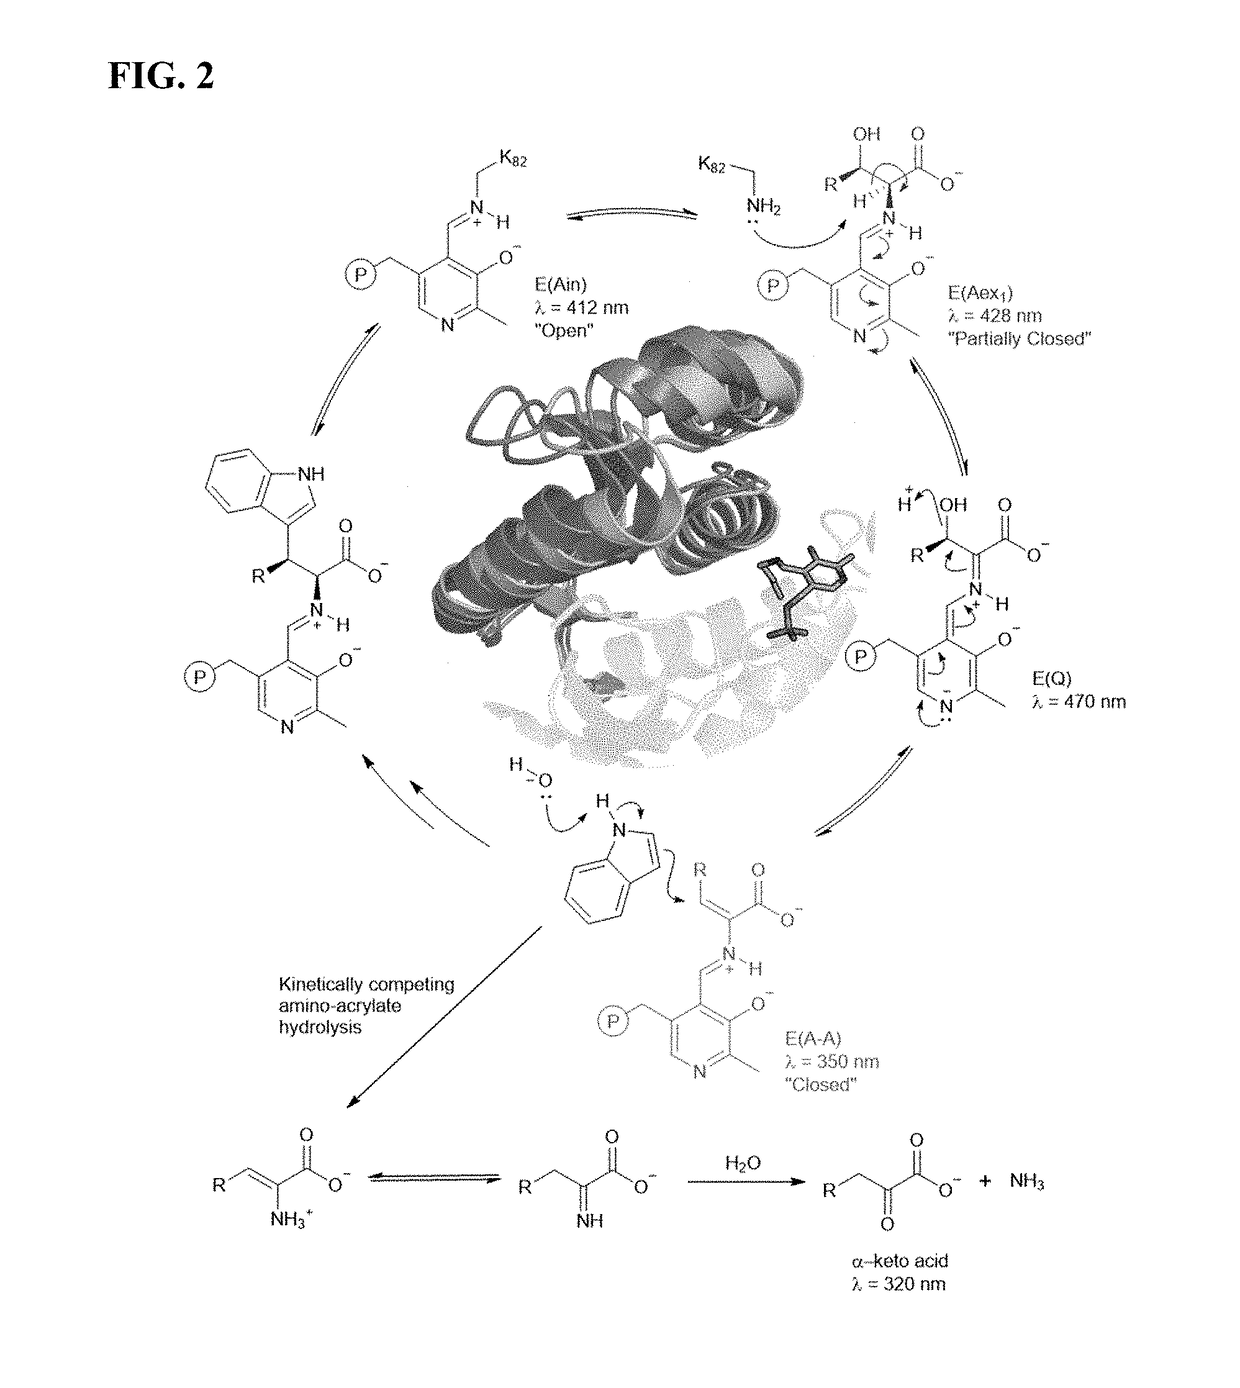 Methods and enzyme catalysts for the synthesis of non-canonical amino acids